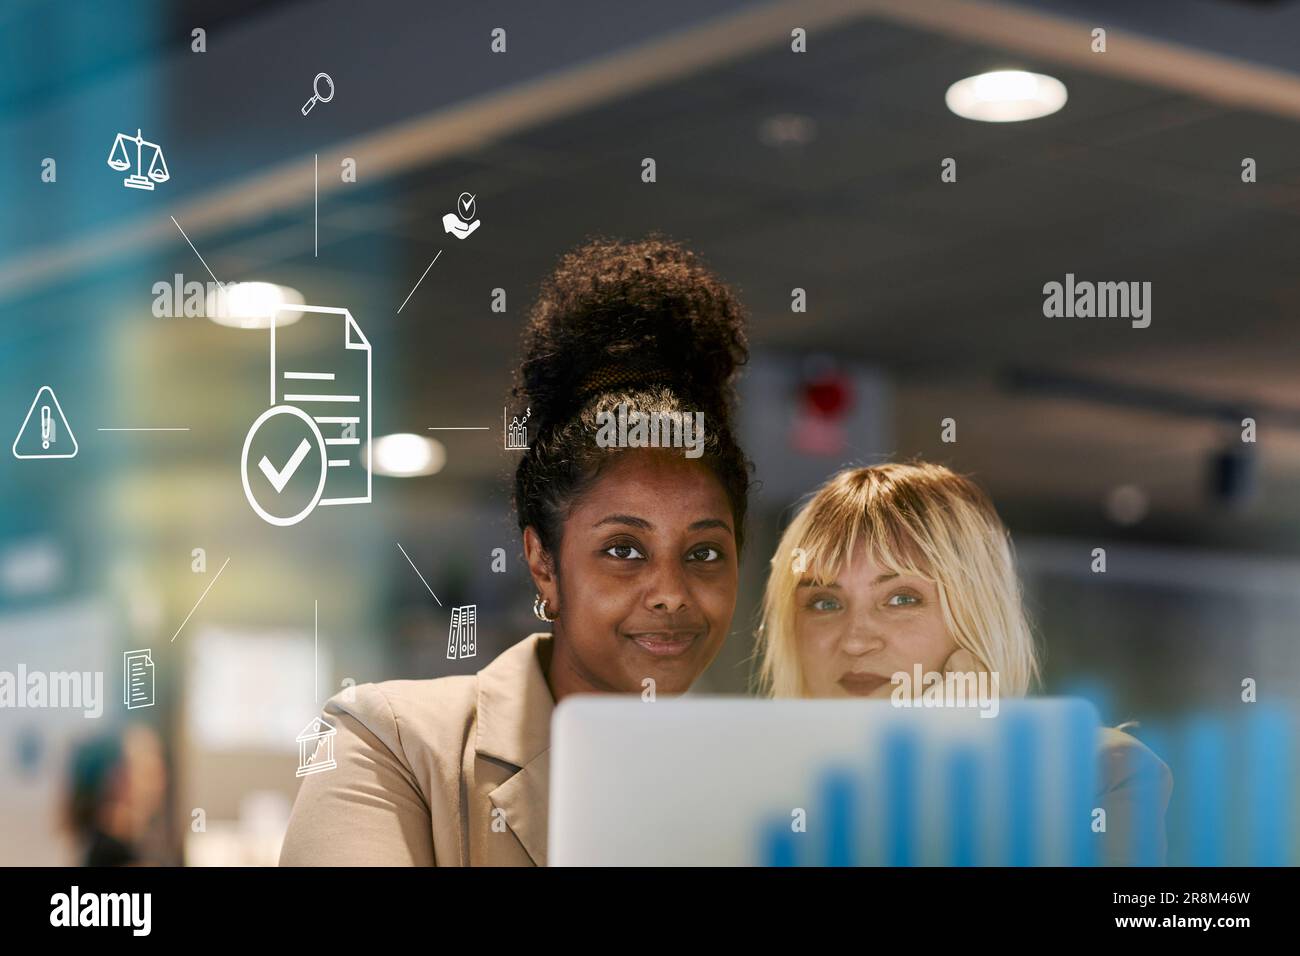 Smiling female colleagues in office, document computer icon in foreground Stock Photo